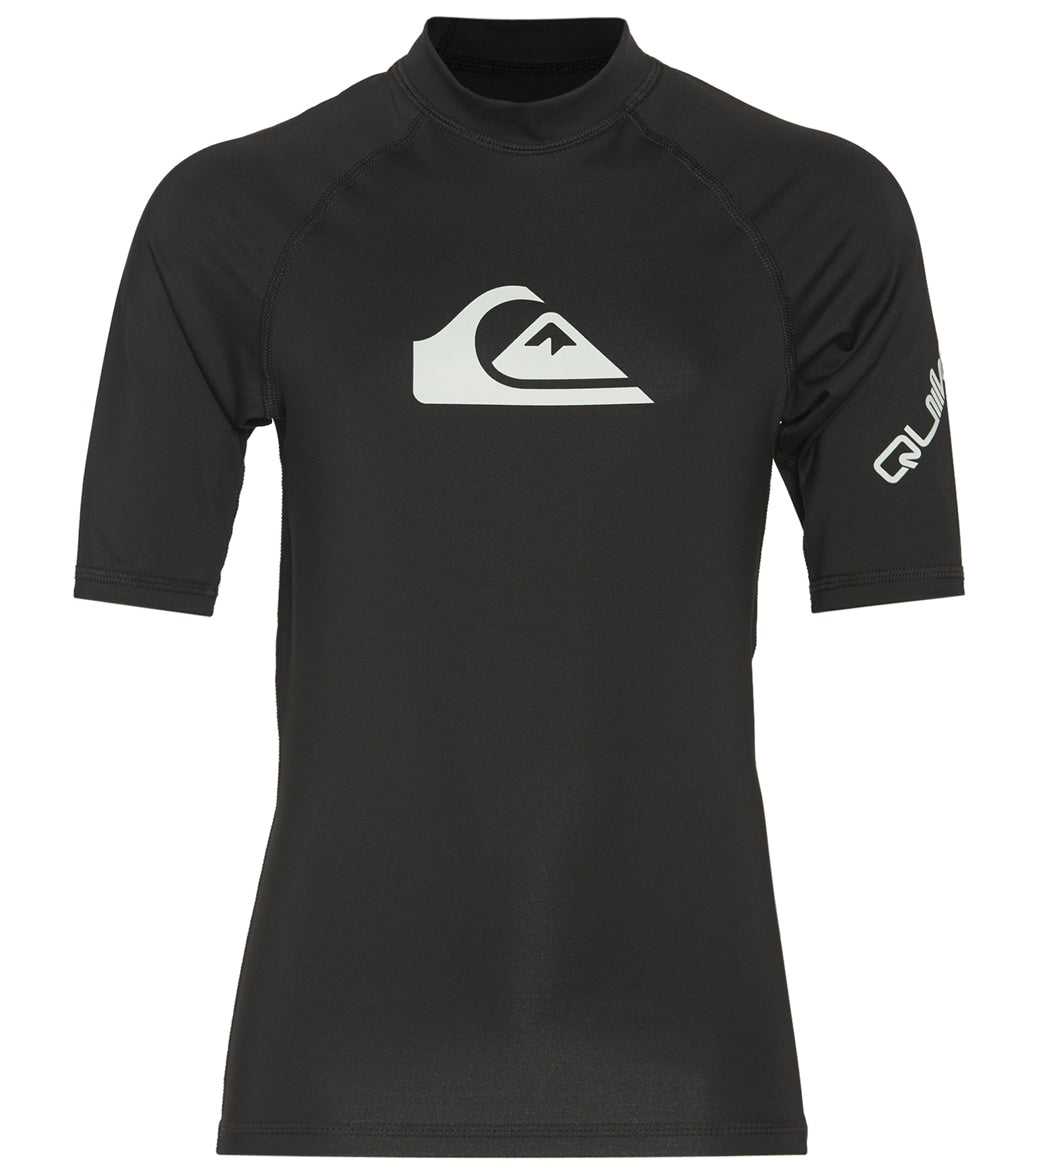 Quiksilver Youth All Time Short Sleeve UPF 50 Rash Guard at SwimOutlet.com